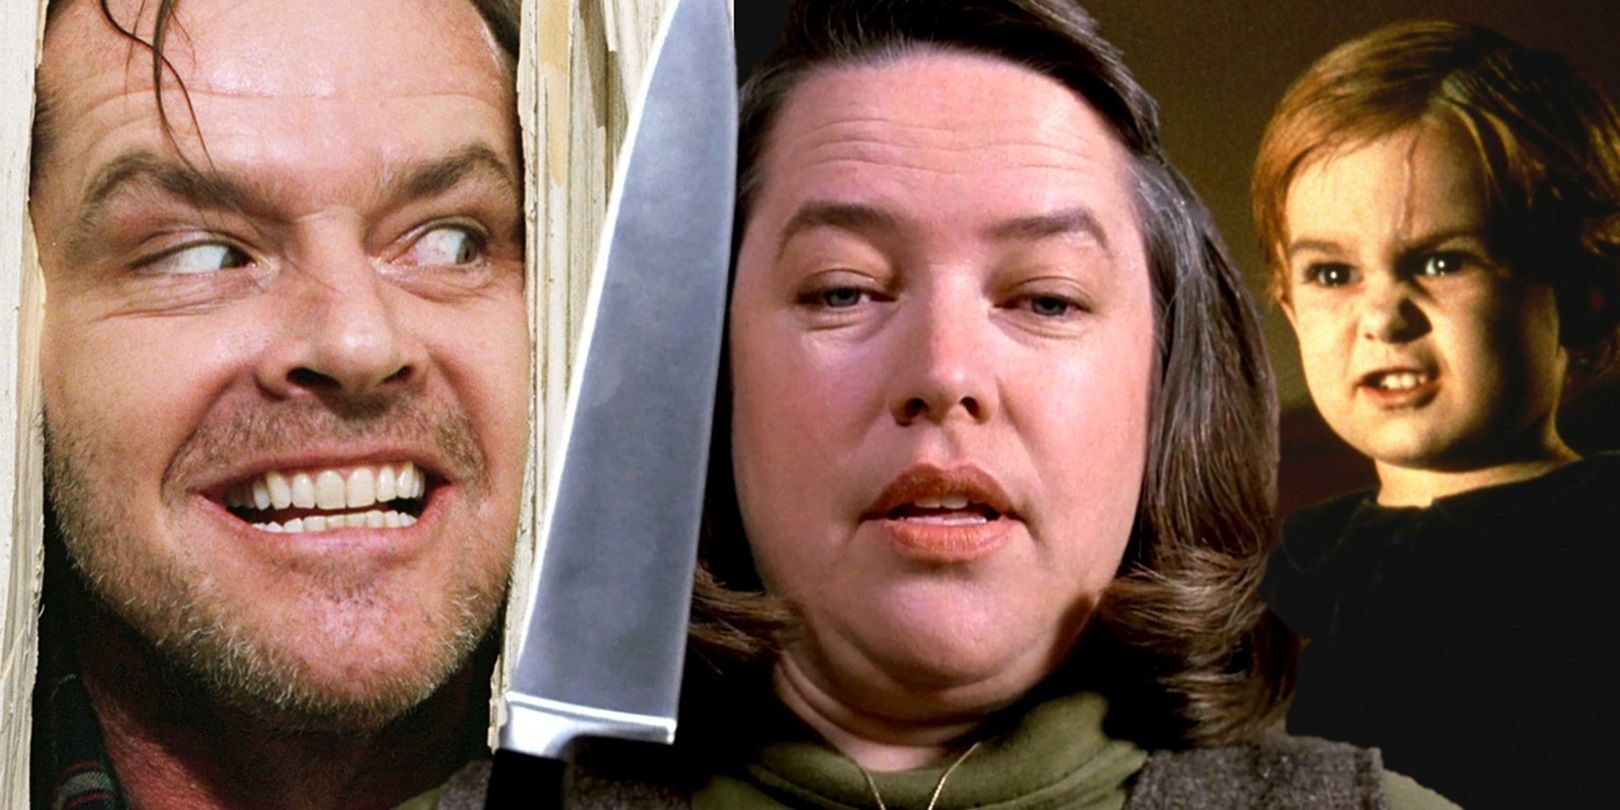 Collage of Jack in The Shining, Annie in Misery, and Gage in Pet Sematary